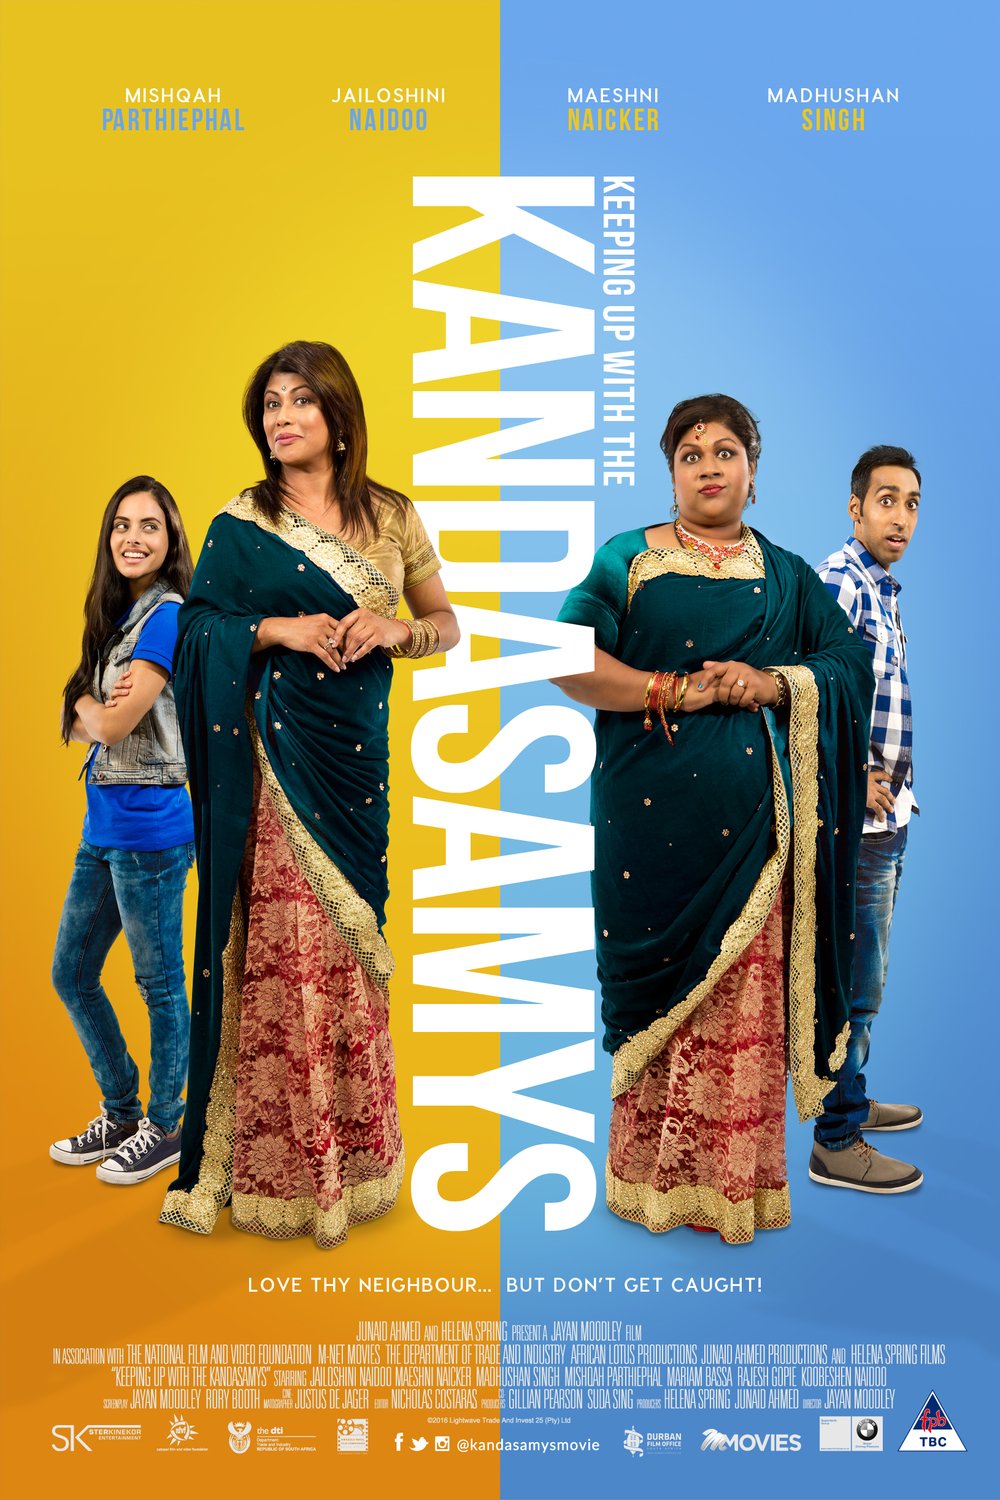 Poster of the movie Keeping Up with the Kandasamys